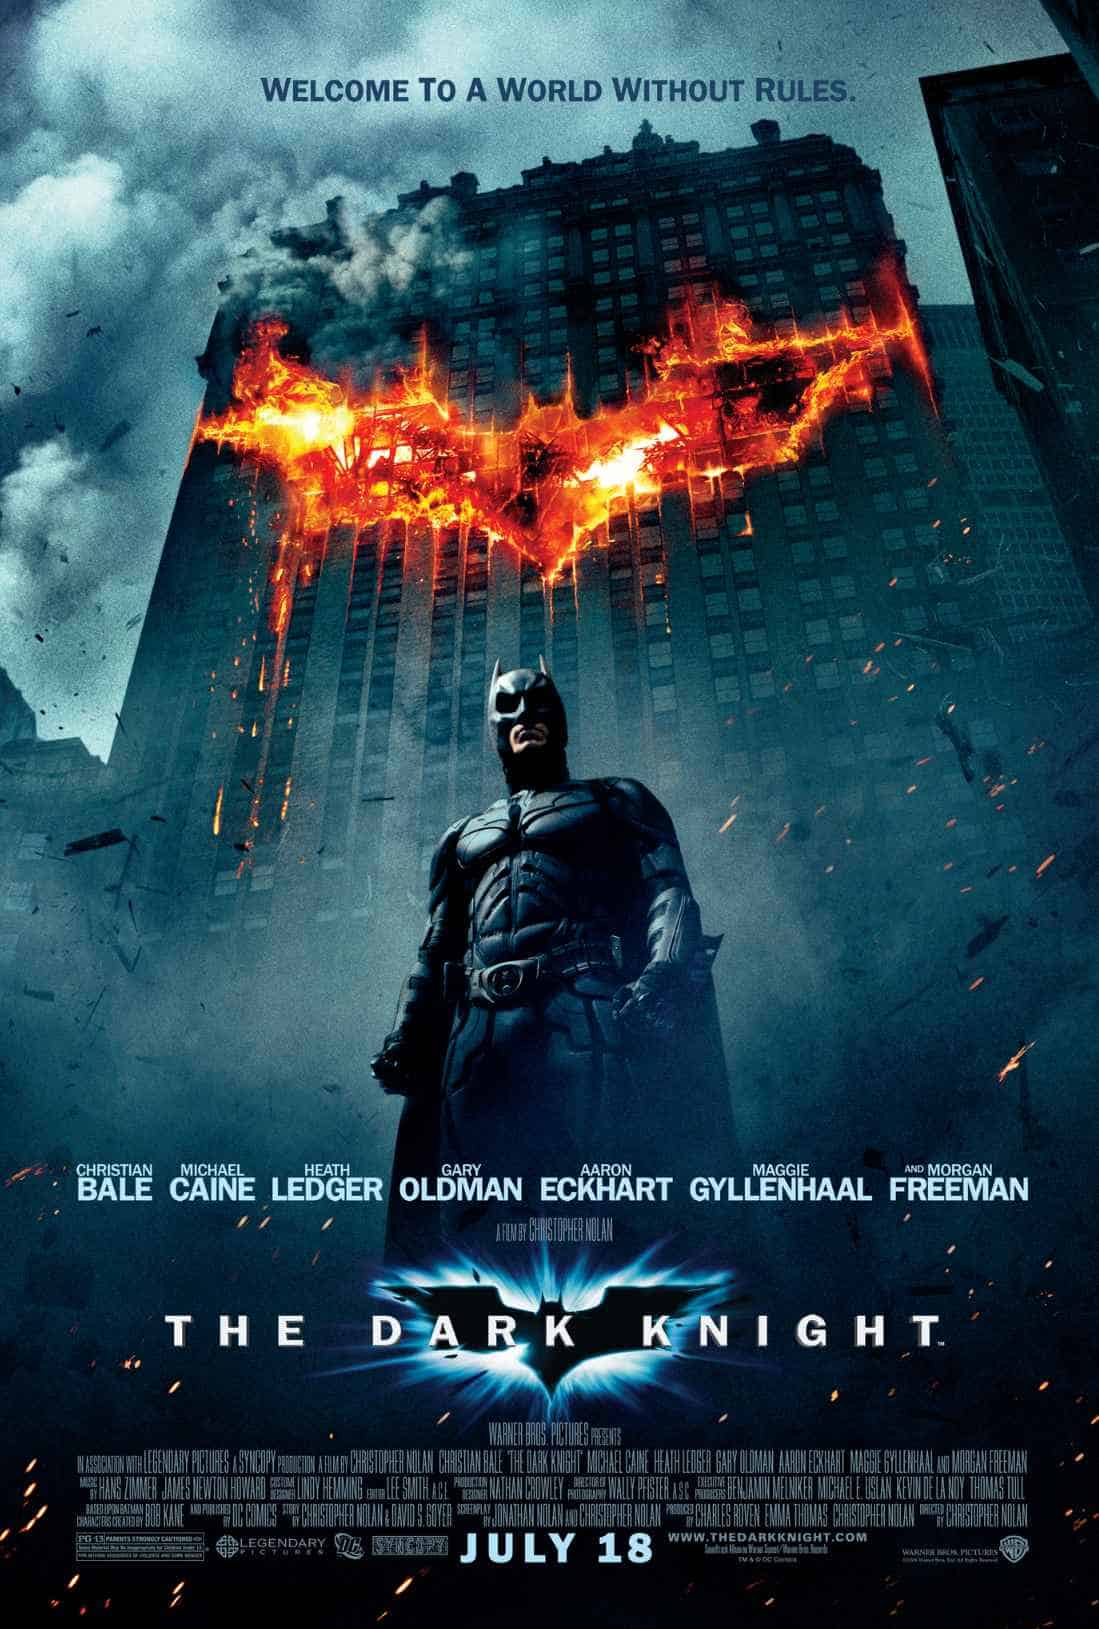 Best Fighting Movies You Can't Miss The Dark Knight (2008)